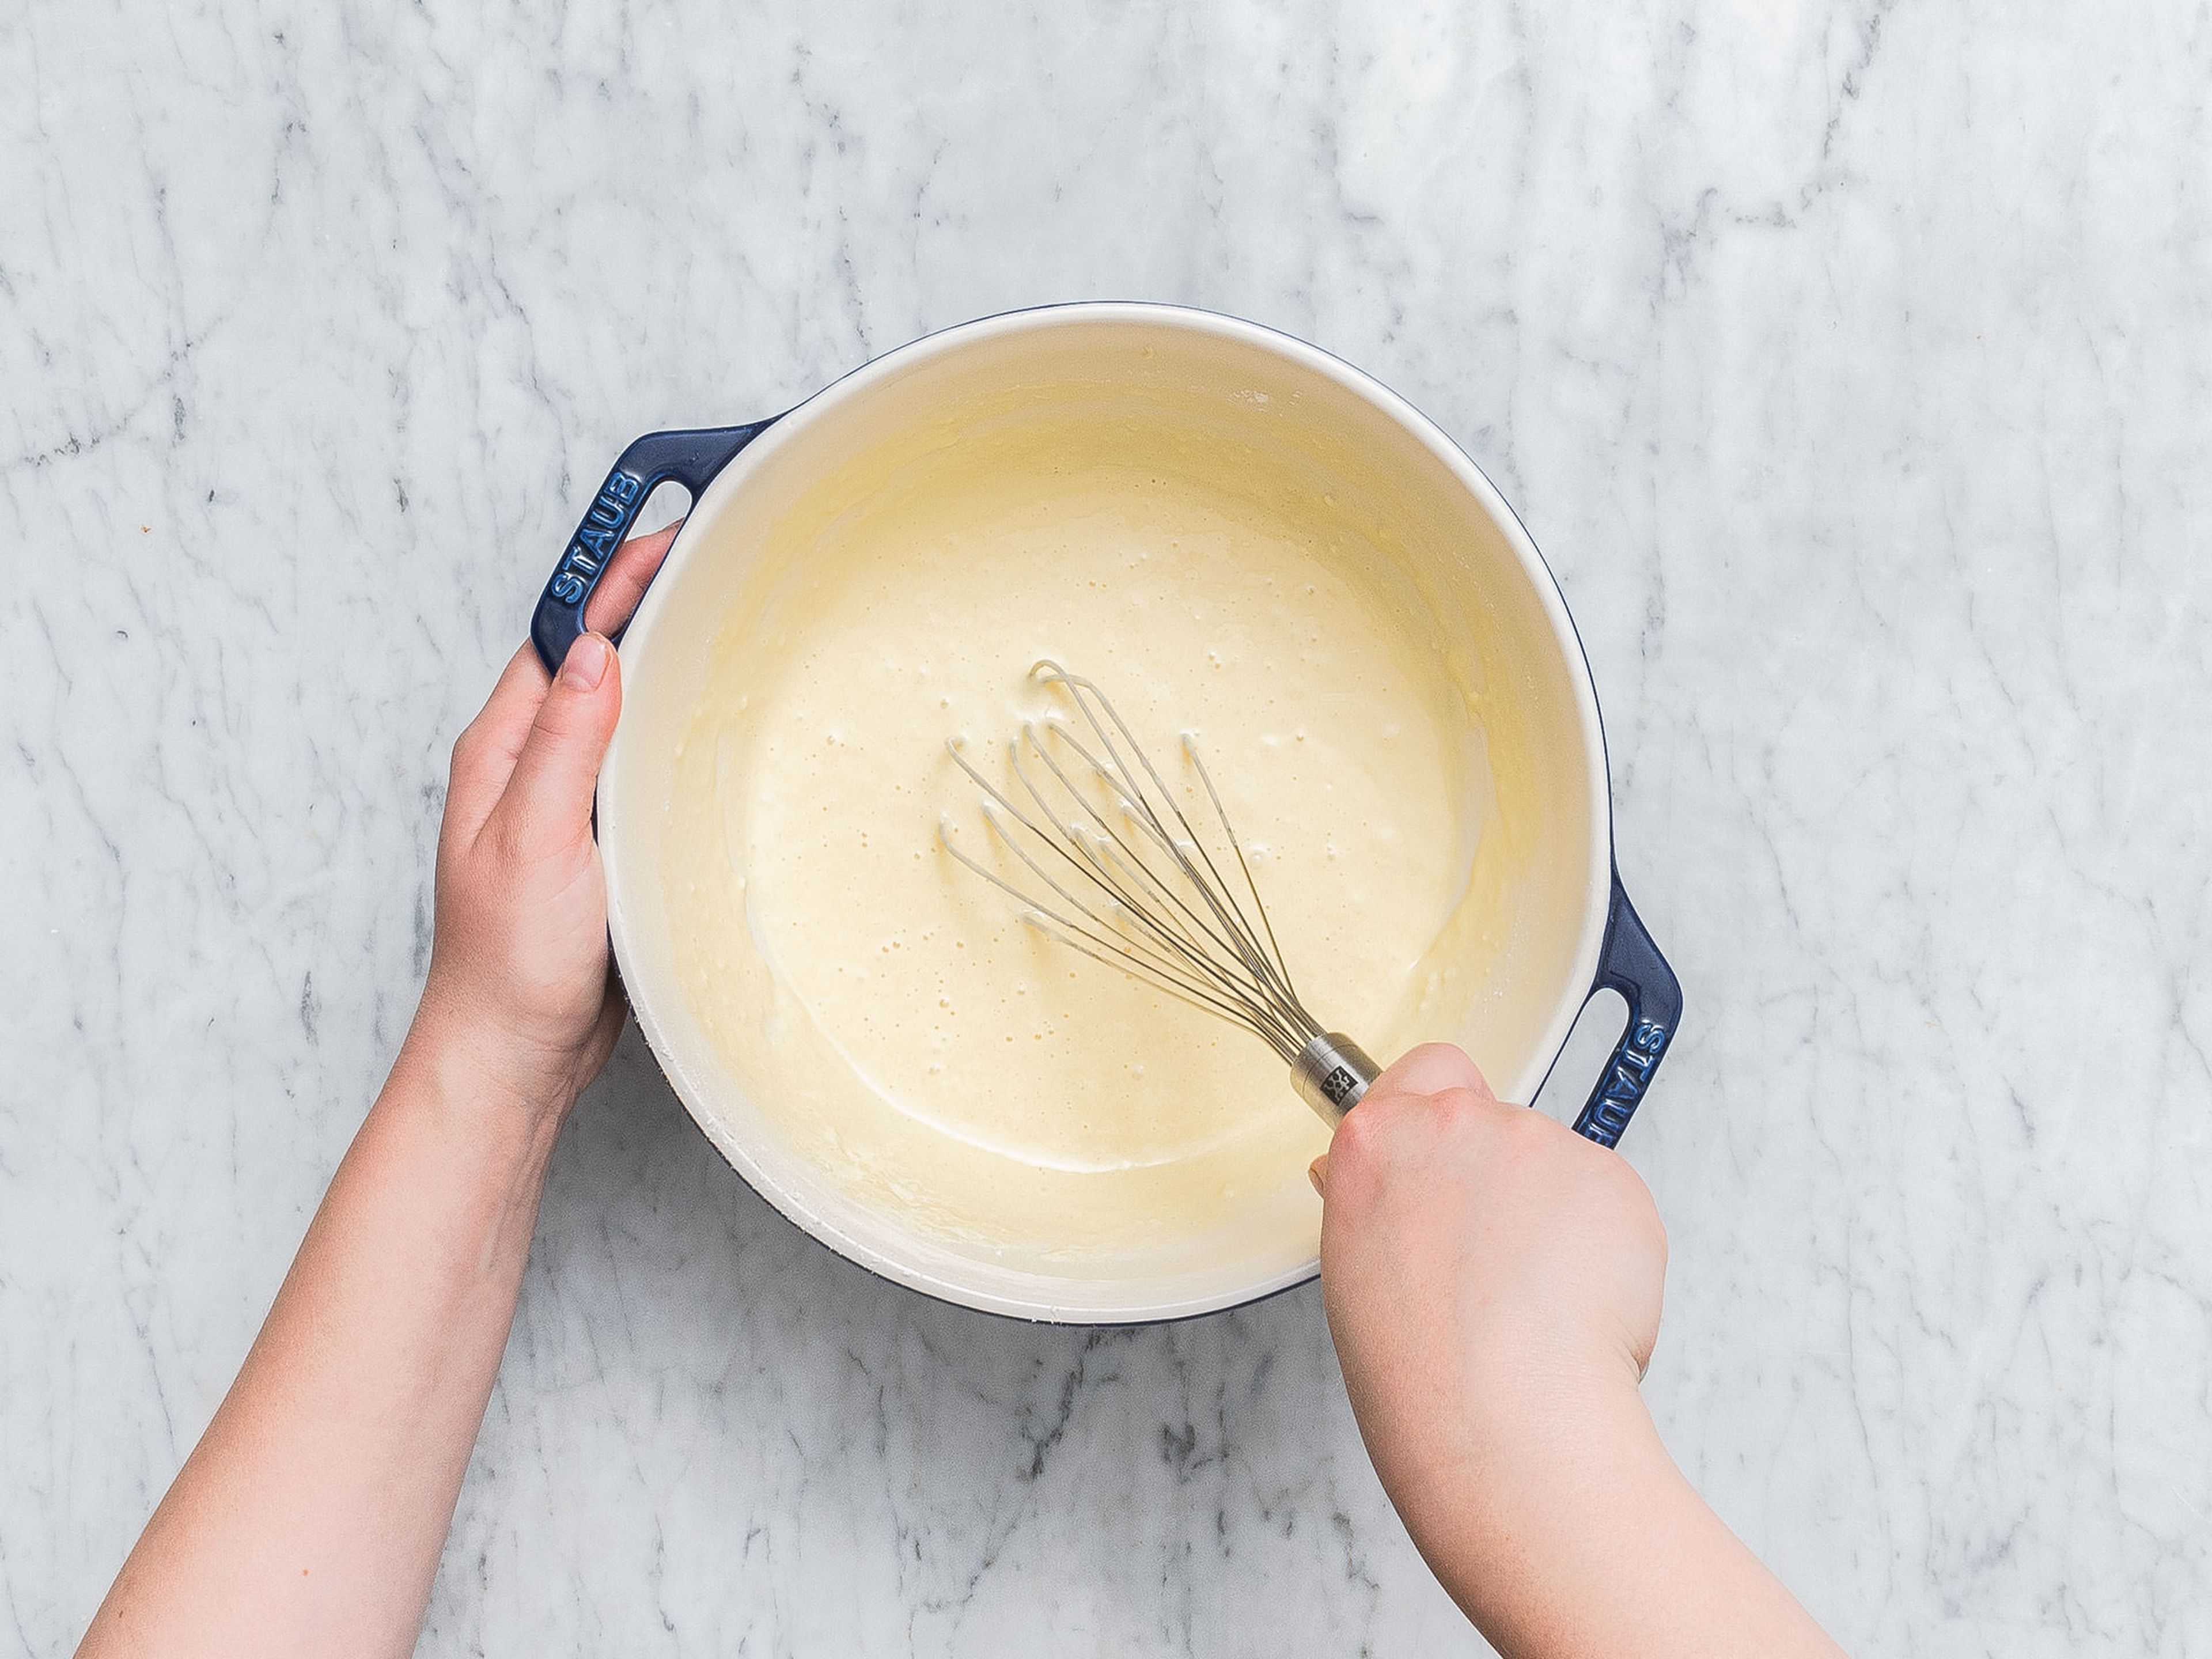 Preheat oven to 220°C/430°F. Add milk, eggs, flour and fine sea salt to a bowl and whisk to combine. Add butter to a cast iron pan and transfer to the oven for approx. 5 min. or until the butter is melted and starts to sizzle.